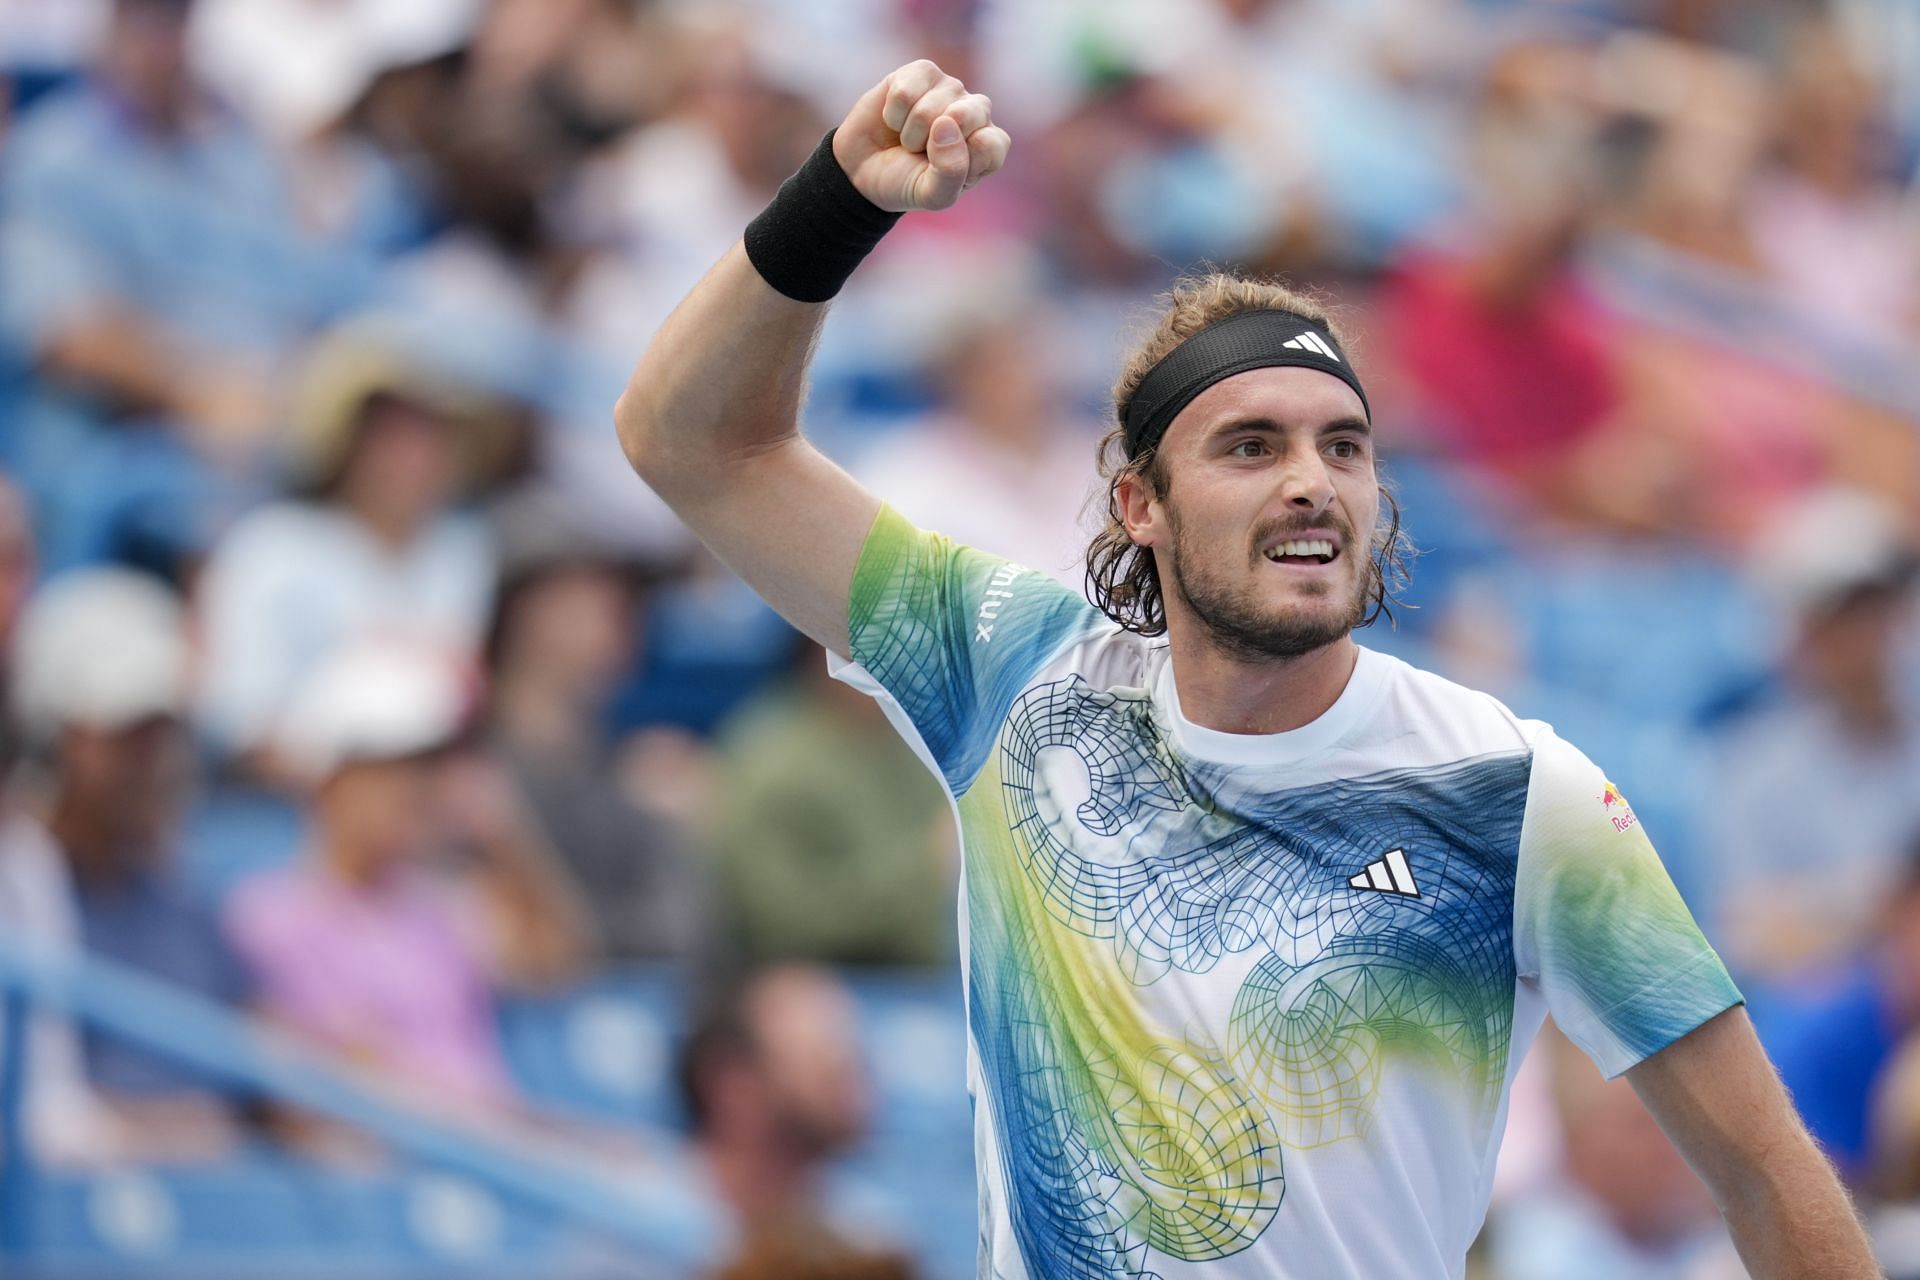 Stefanos Tsitsipas advances at the Western &amp; Southern Open